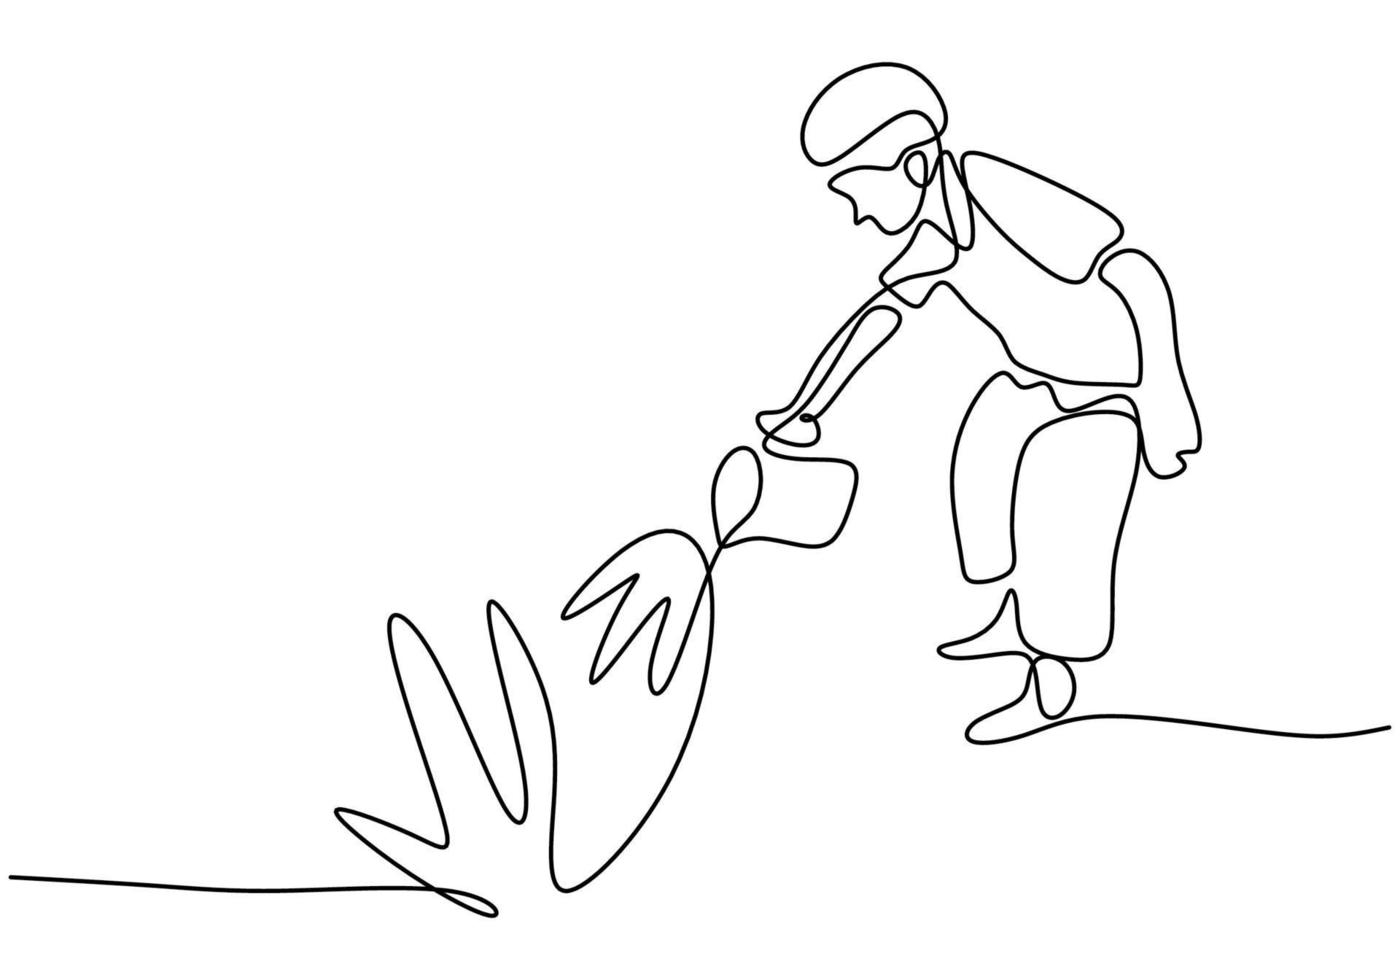 Single continuous line drawing of a son watering a plant at home garden. Happy little boy learning to care for plants and watering to make it growing isolated on white background. Vector illustration